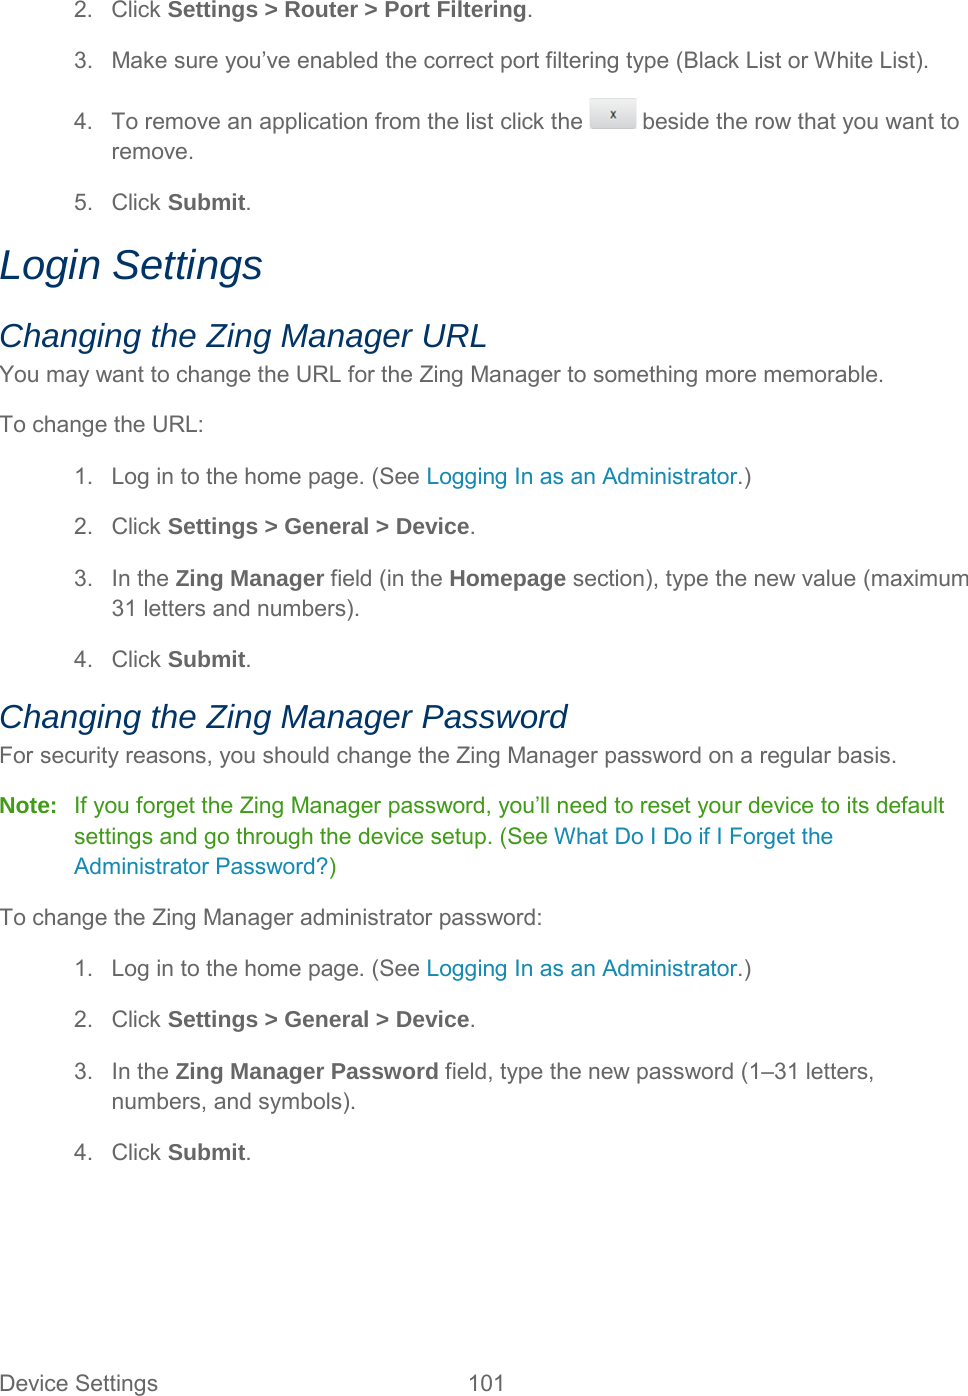 2. Click Settings &gt; Router &gt; Port Filtering. 3. Make sure you’ve enabled the correct port filtering type (Black List or White List). 4. To remove an application from the list click the   beside the row that you want to remove. 5. Click Submit. Login Settings Changing the Zing Manager URL You may want to change the URL for the Zing Manager to something more memorable. To change the URL: 1. Log in to the home page. (See Logging In as an Administrator.) 2. Click Settings &gt; General &gt; Device. 3. In the Zing Manager field (in the Homepage section), type the new value (maximum 31 letters and numbers). 4. Click Submit. Changing the Zing Manager Password For security reasons, you should change the Zing Manager password on a regular basis. Note:   If you forget the Zing Manager password, you’ll need to reset your device to its default settings and go through the device setup. (See What Do I Do if I Forget the Administrator Password?) To change the Zing Manager administrator password: 1. Log in to the home page. (See Logging In as an Administrator.) 2. Click Settings &gt; General &gt; Device. 3. In the Zing Manager Password field, type the new password (1–31 letters, numbers, and symbols). 4. Click Submit.  Device Settings 101   